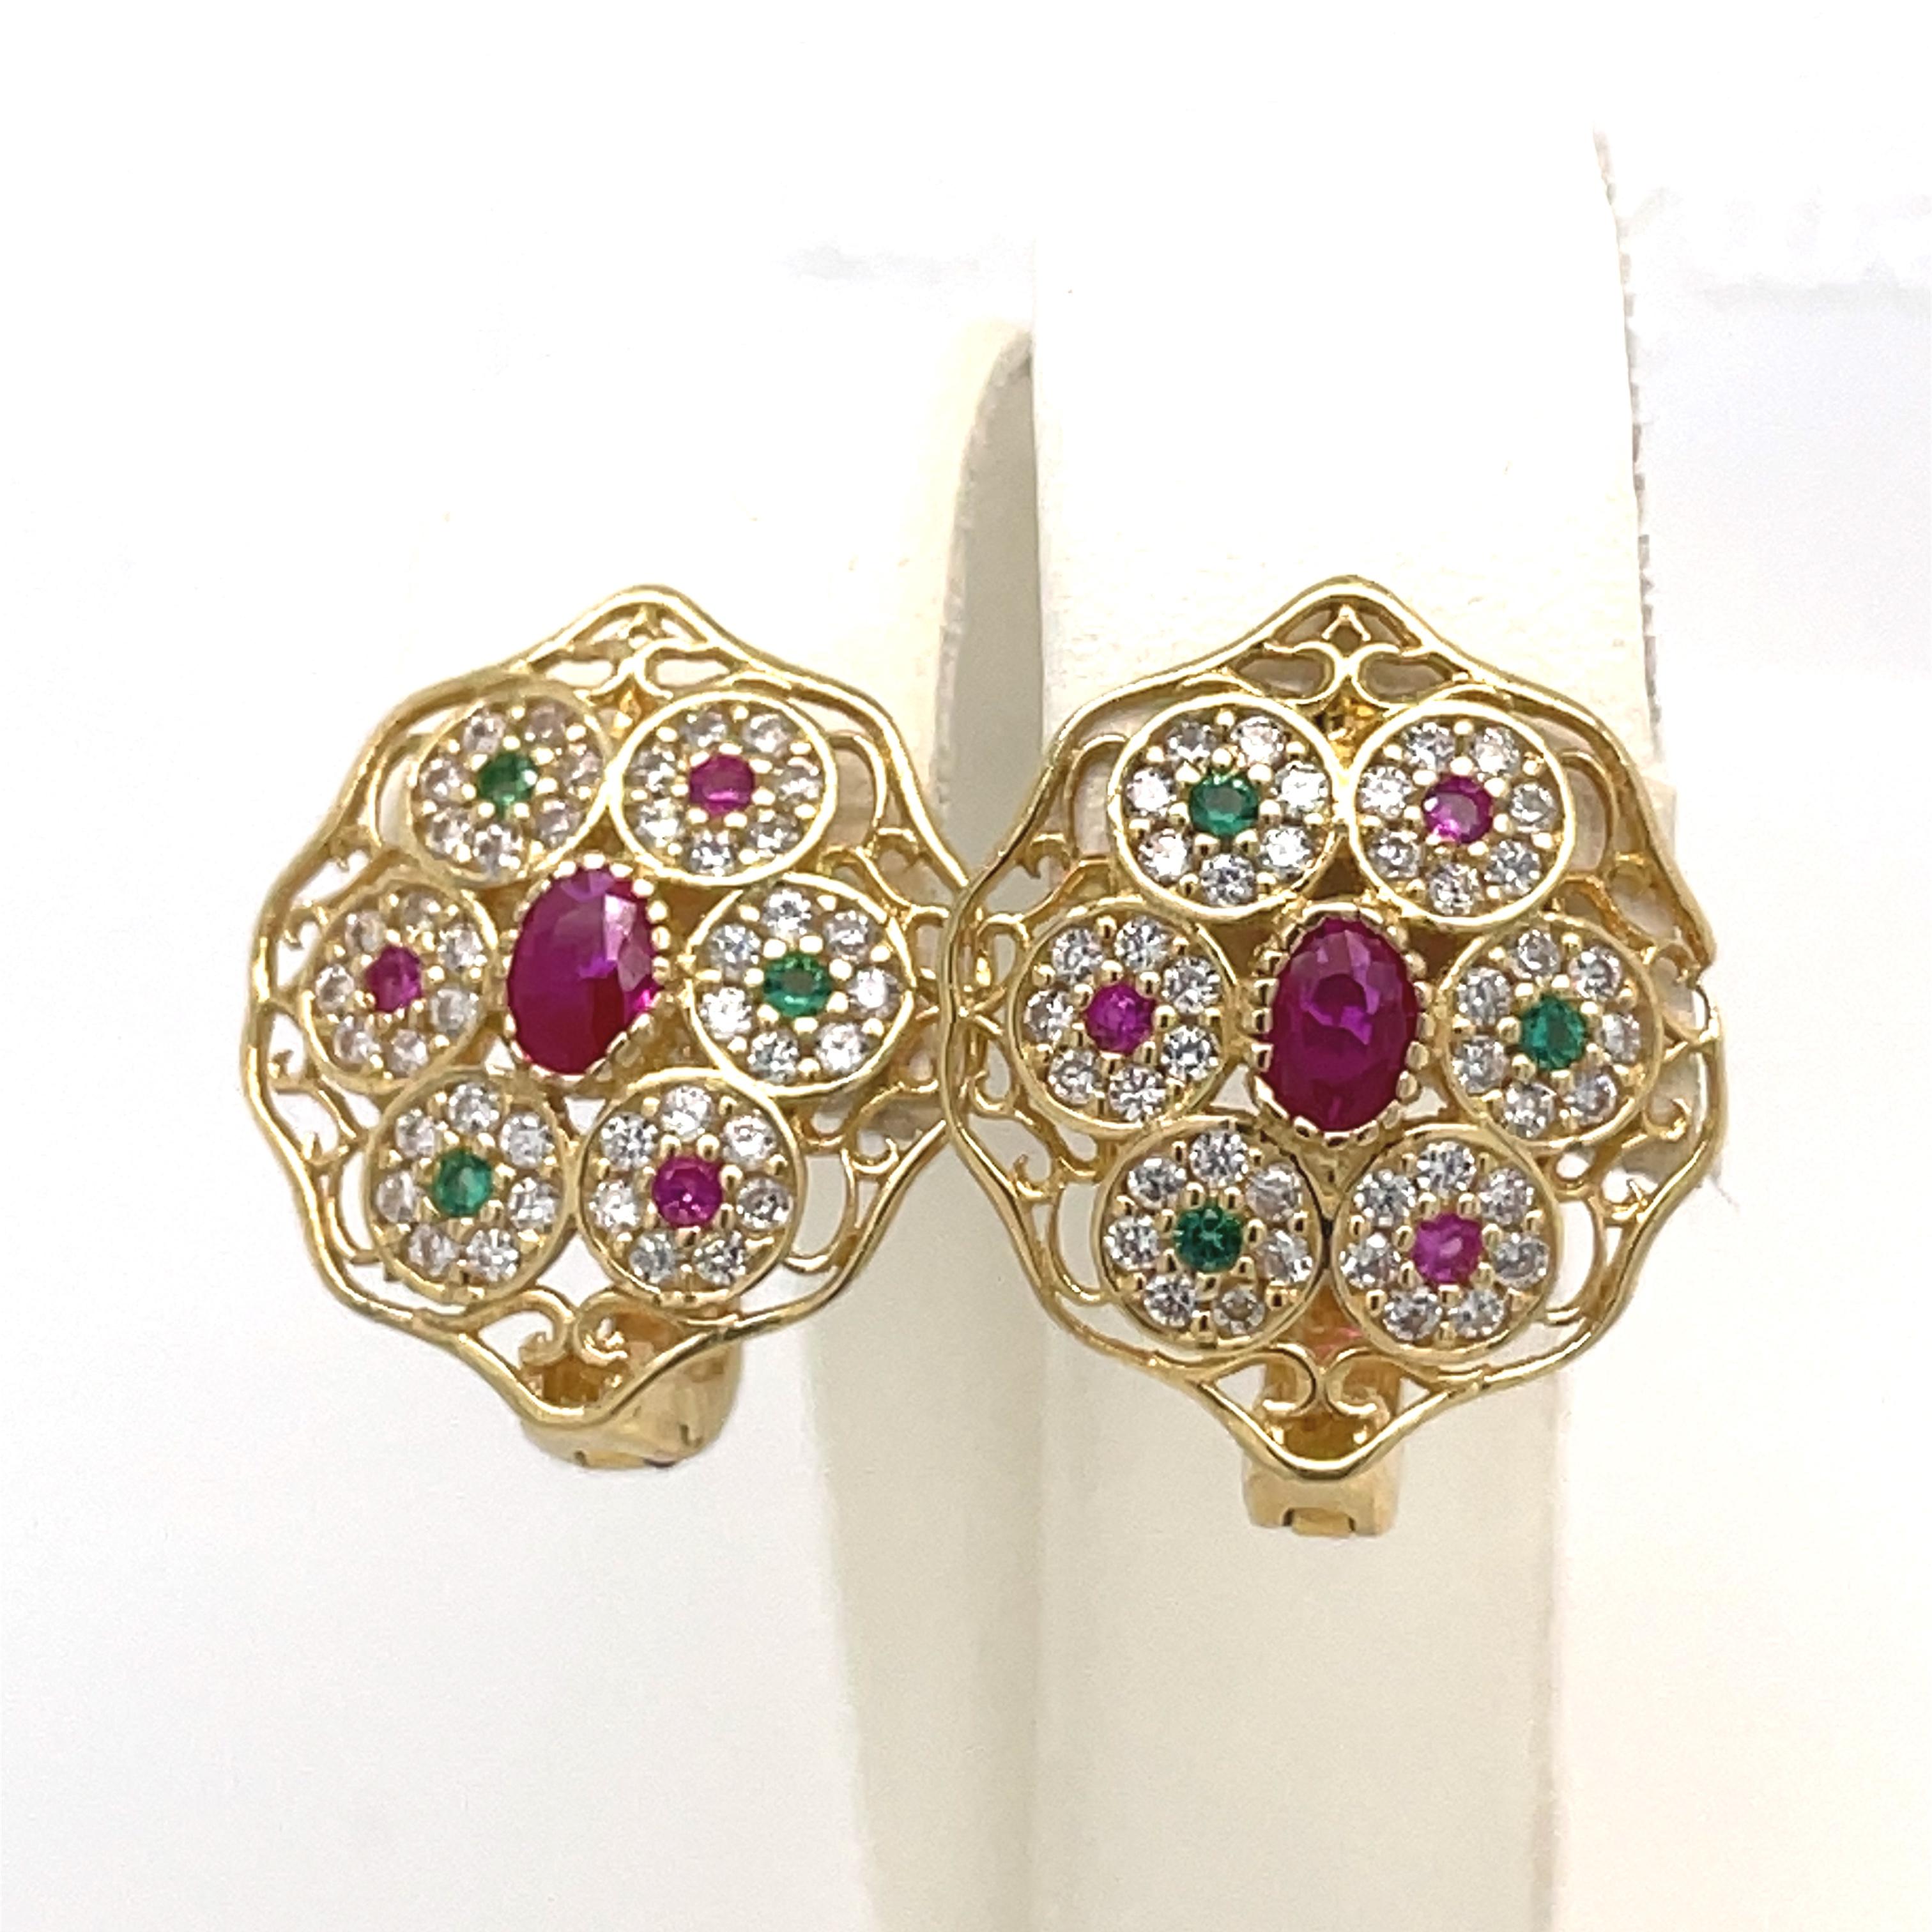 Vintage Art Deco Earrings- 18k Yellow Gold Oval+Round Multi-Color Cubic Zirconia For Sale 4